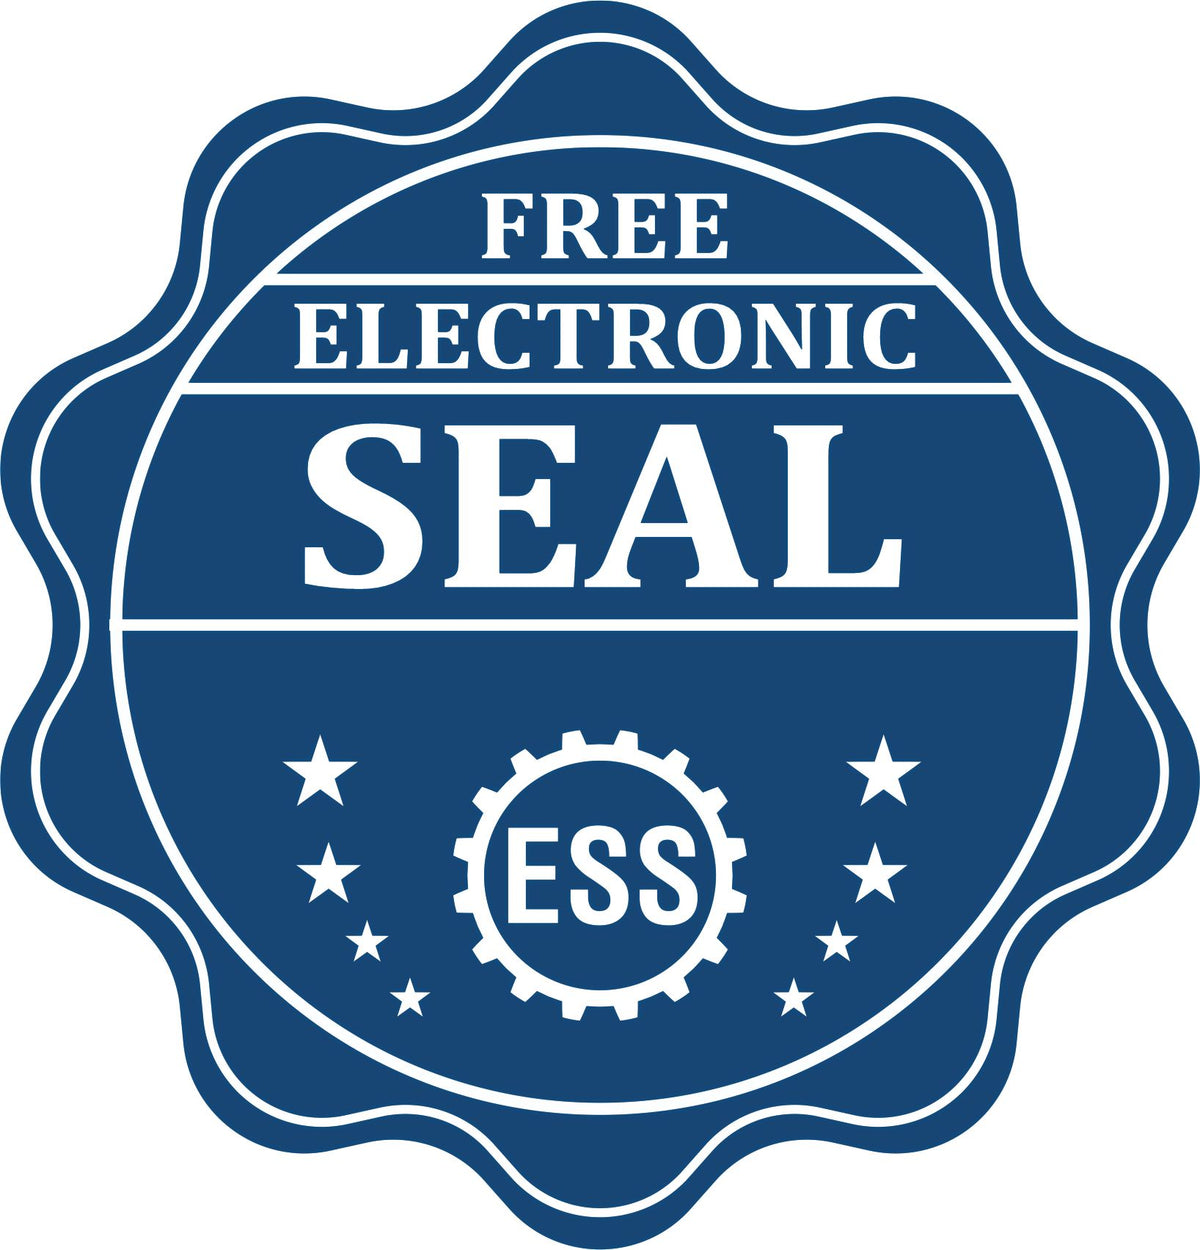 A badge showing a free electronic seal for the Gift Washington Land Surveyor Seal with stars and the ESS gear on the emblem.